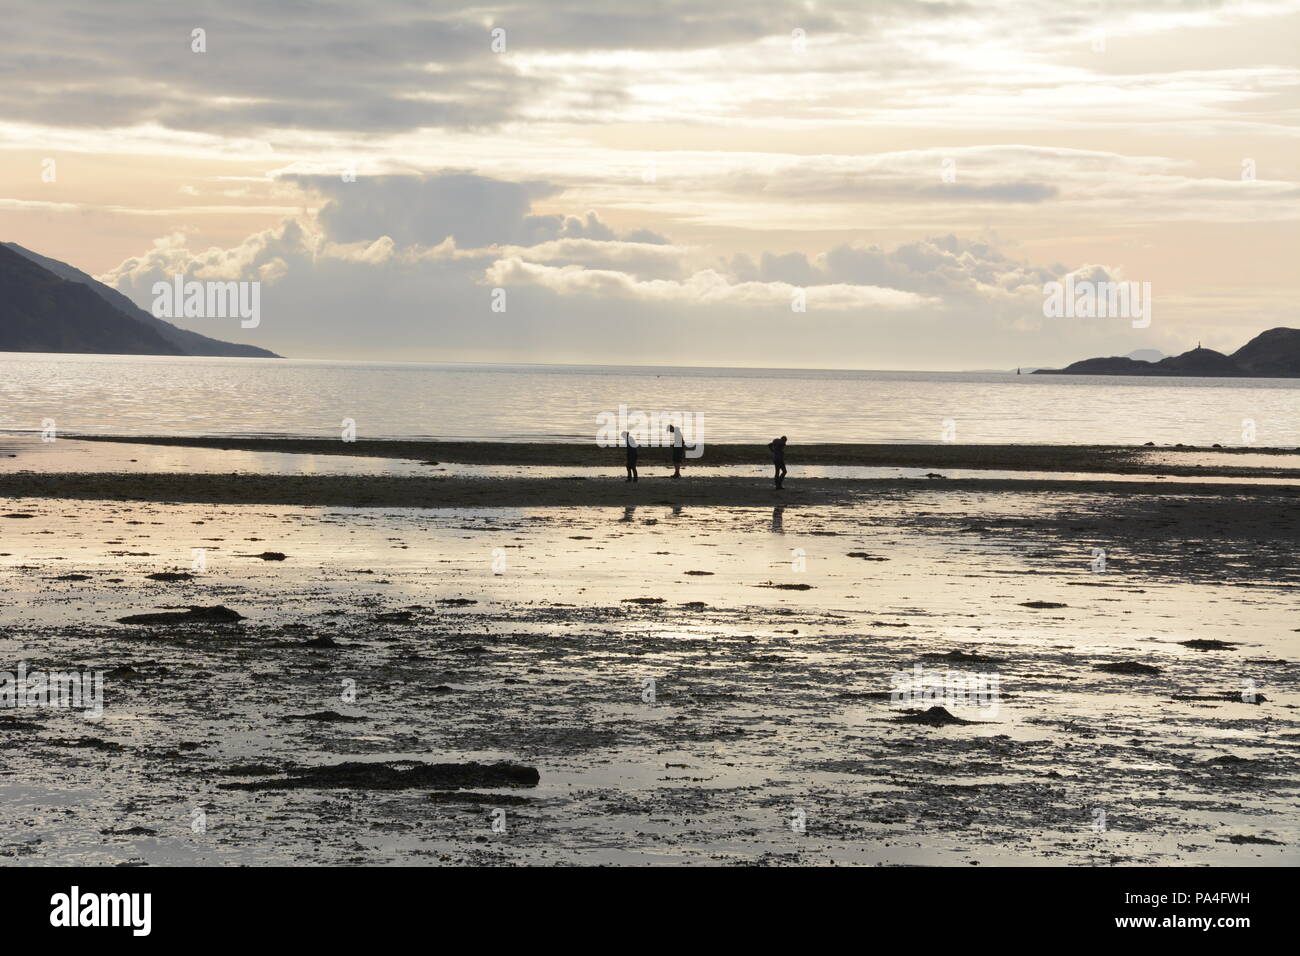 Three people beachcombing in the intertidal zone of the Atlantic Ocean at sunset in the town of Inverie, Knoydart Peninsula, Scotland, United KIngdom. Stock Photo